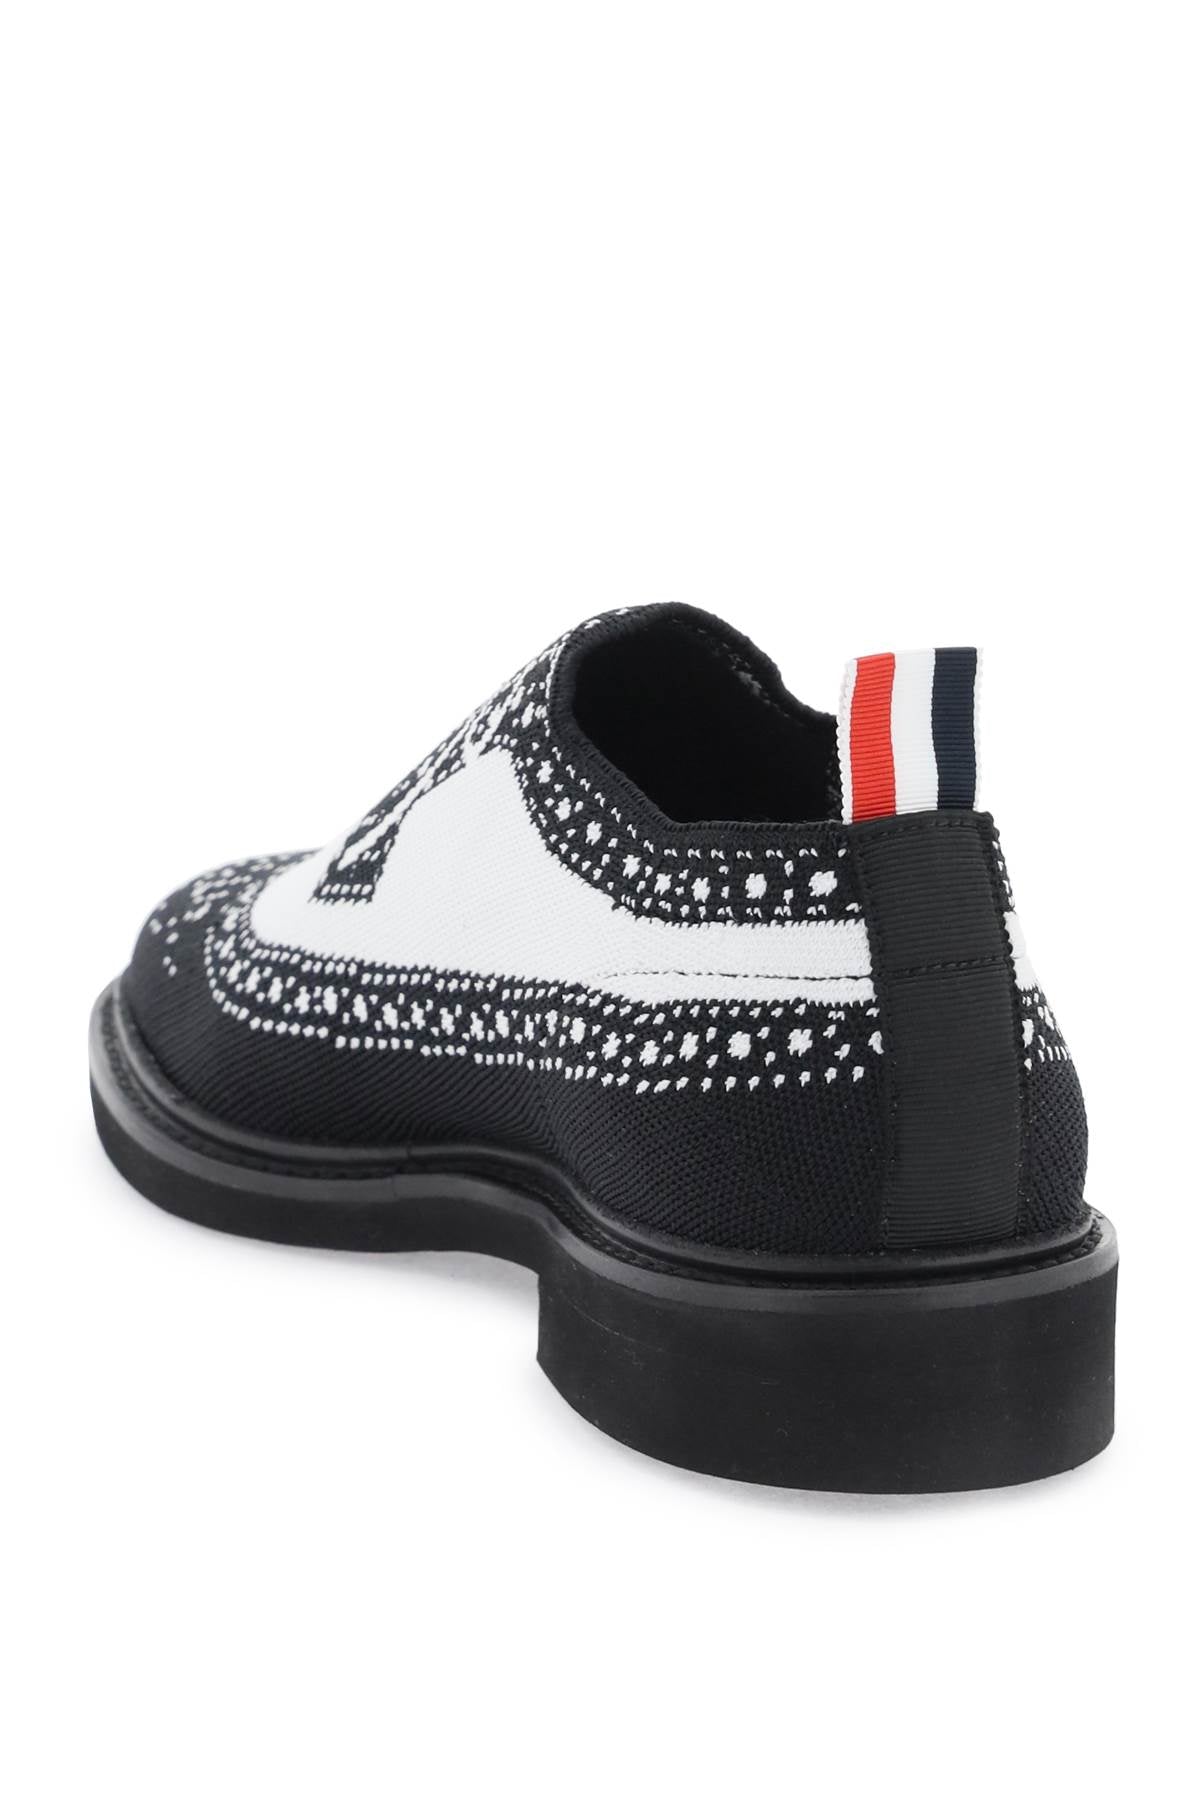 Thom browne longwing brogue loafers in trompe l'oeil knit-2